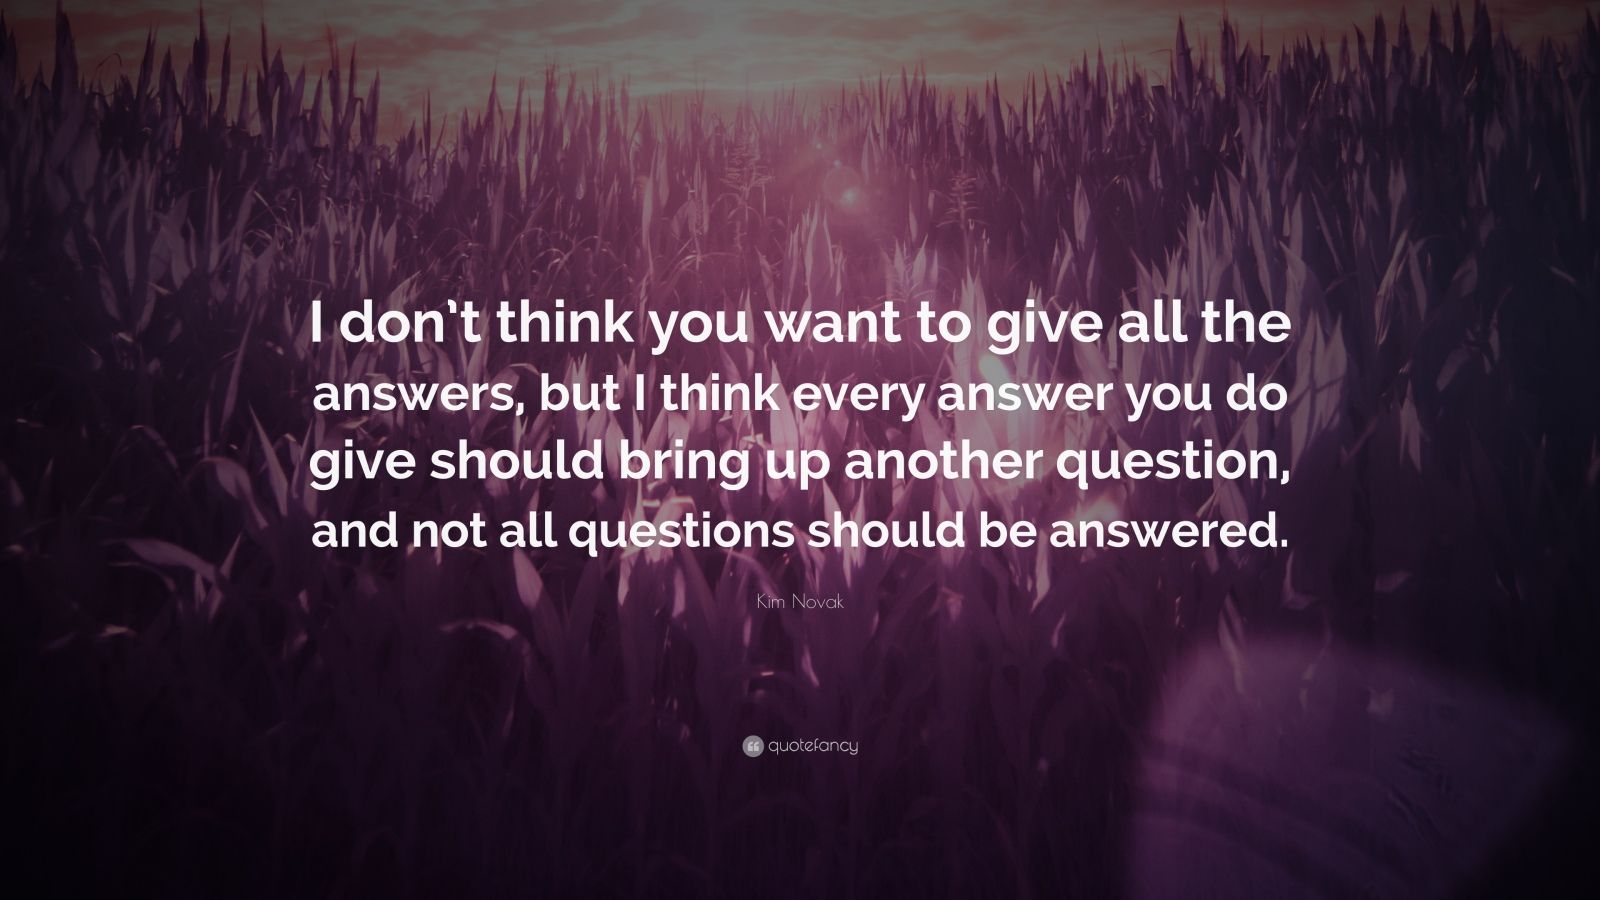 Kim Novak Quote: “I don’t think you want to give all the answers, but I ...